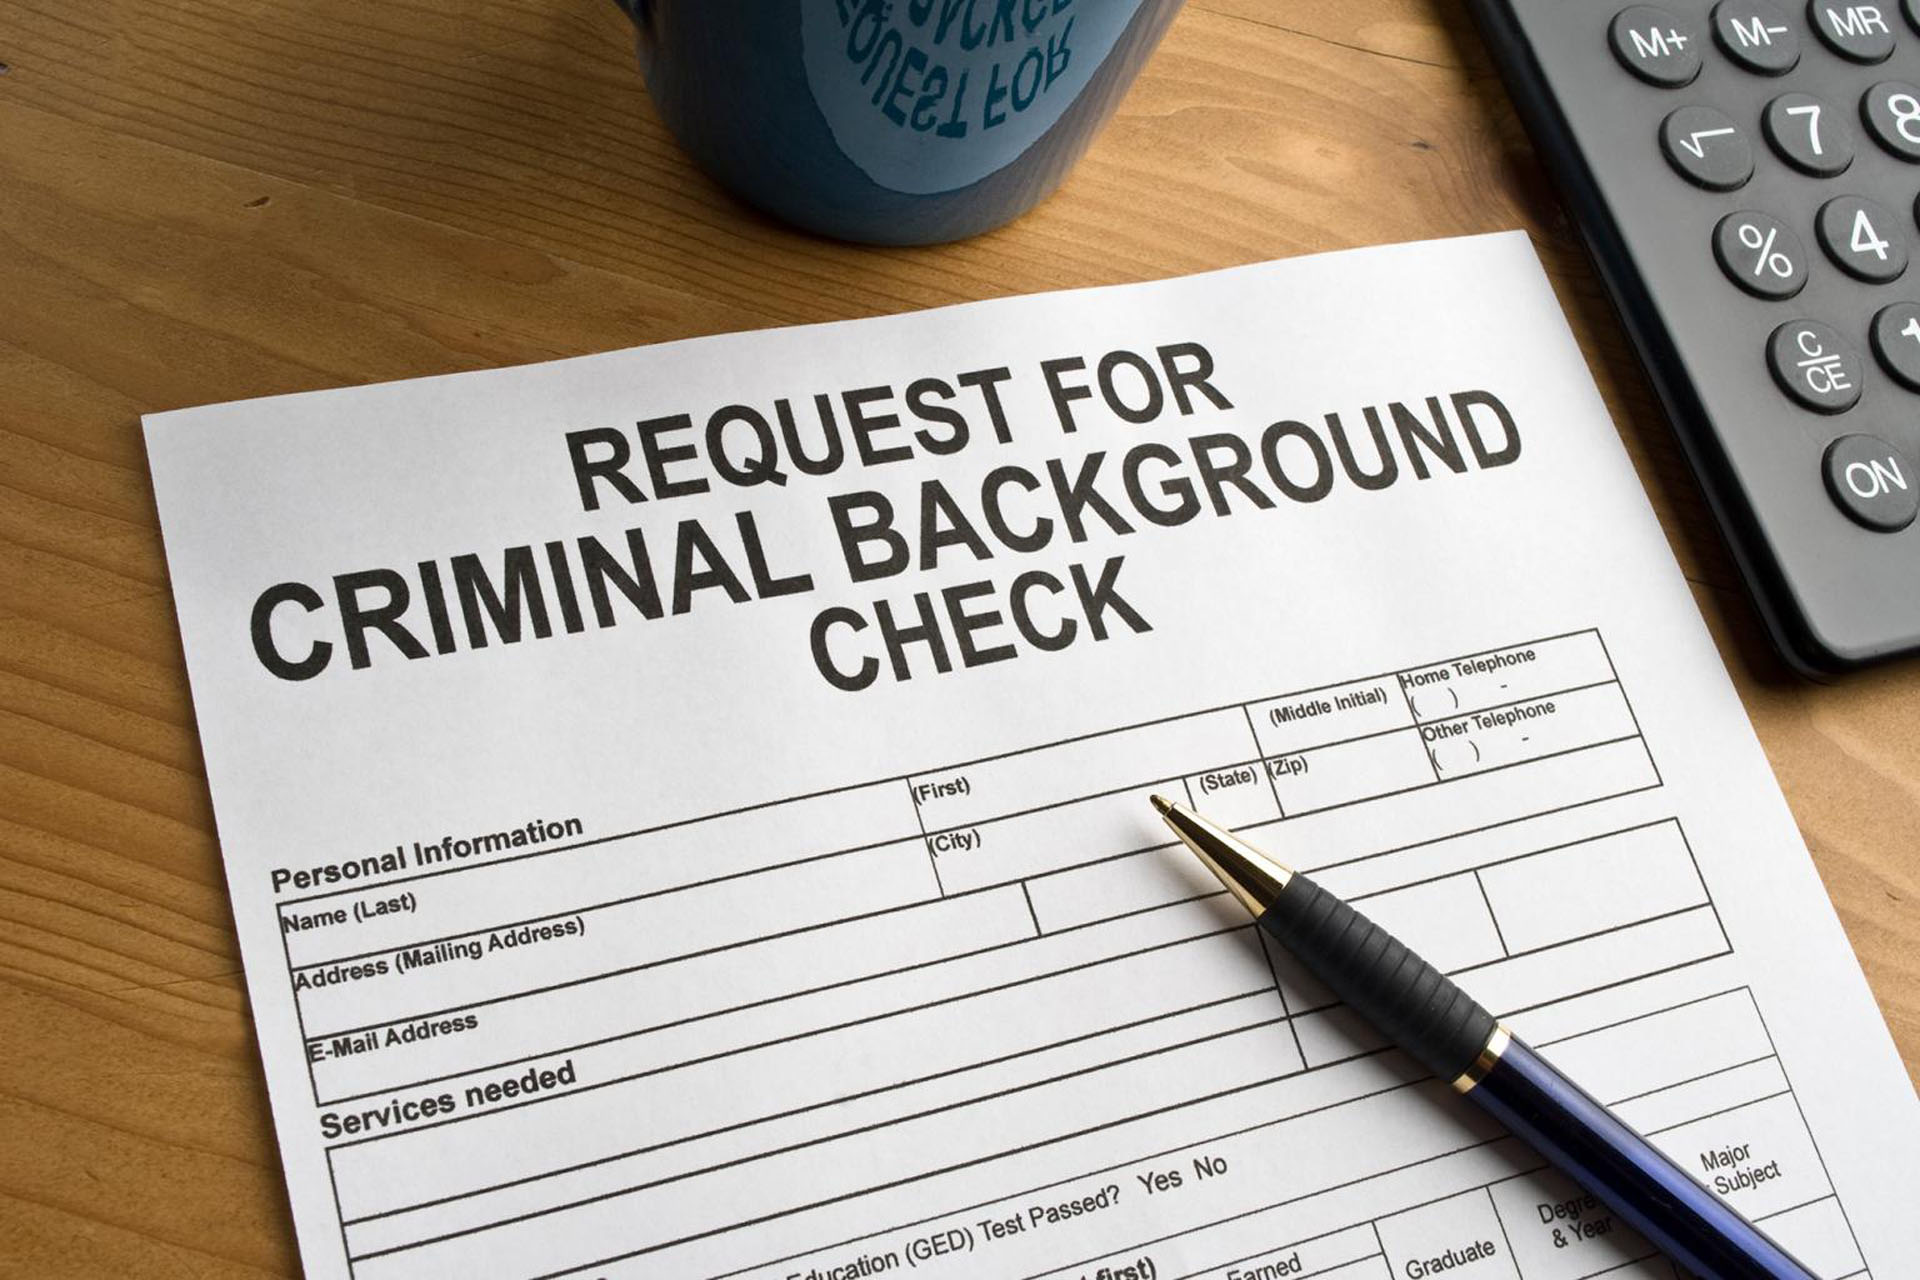 A request for criminal background check document